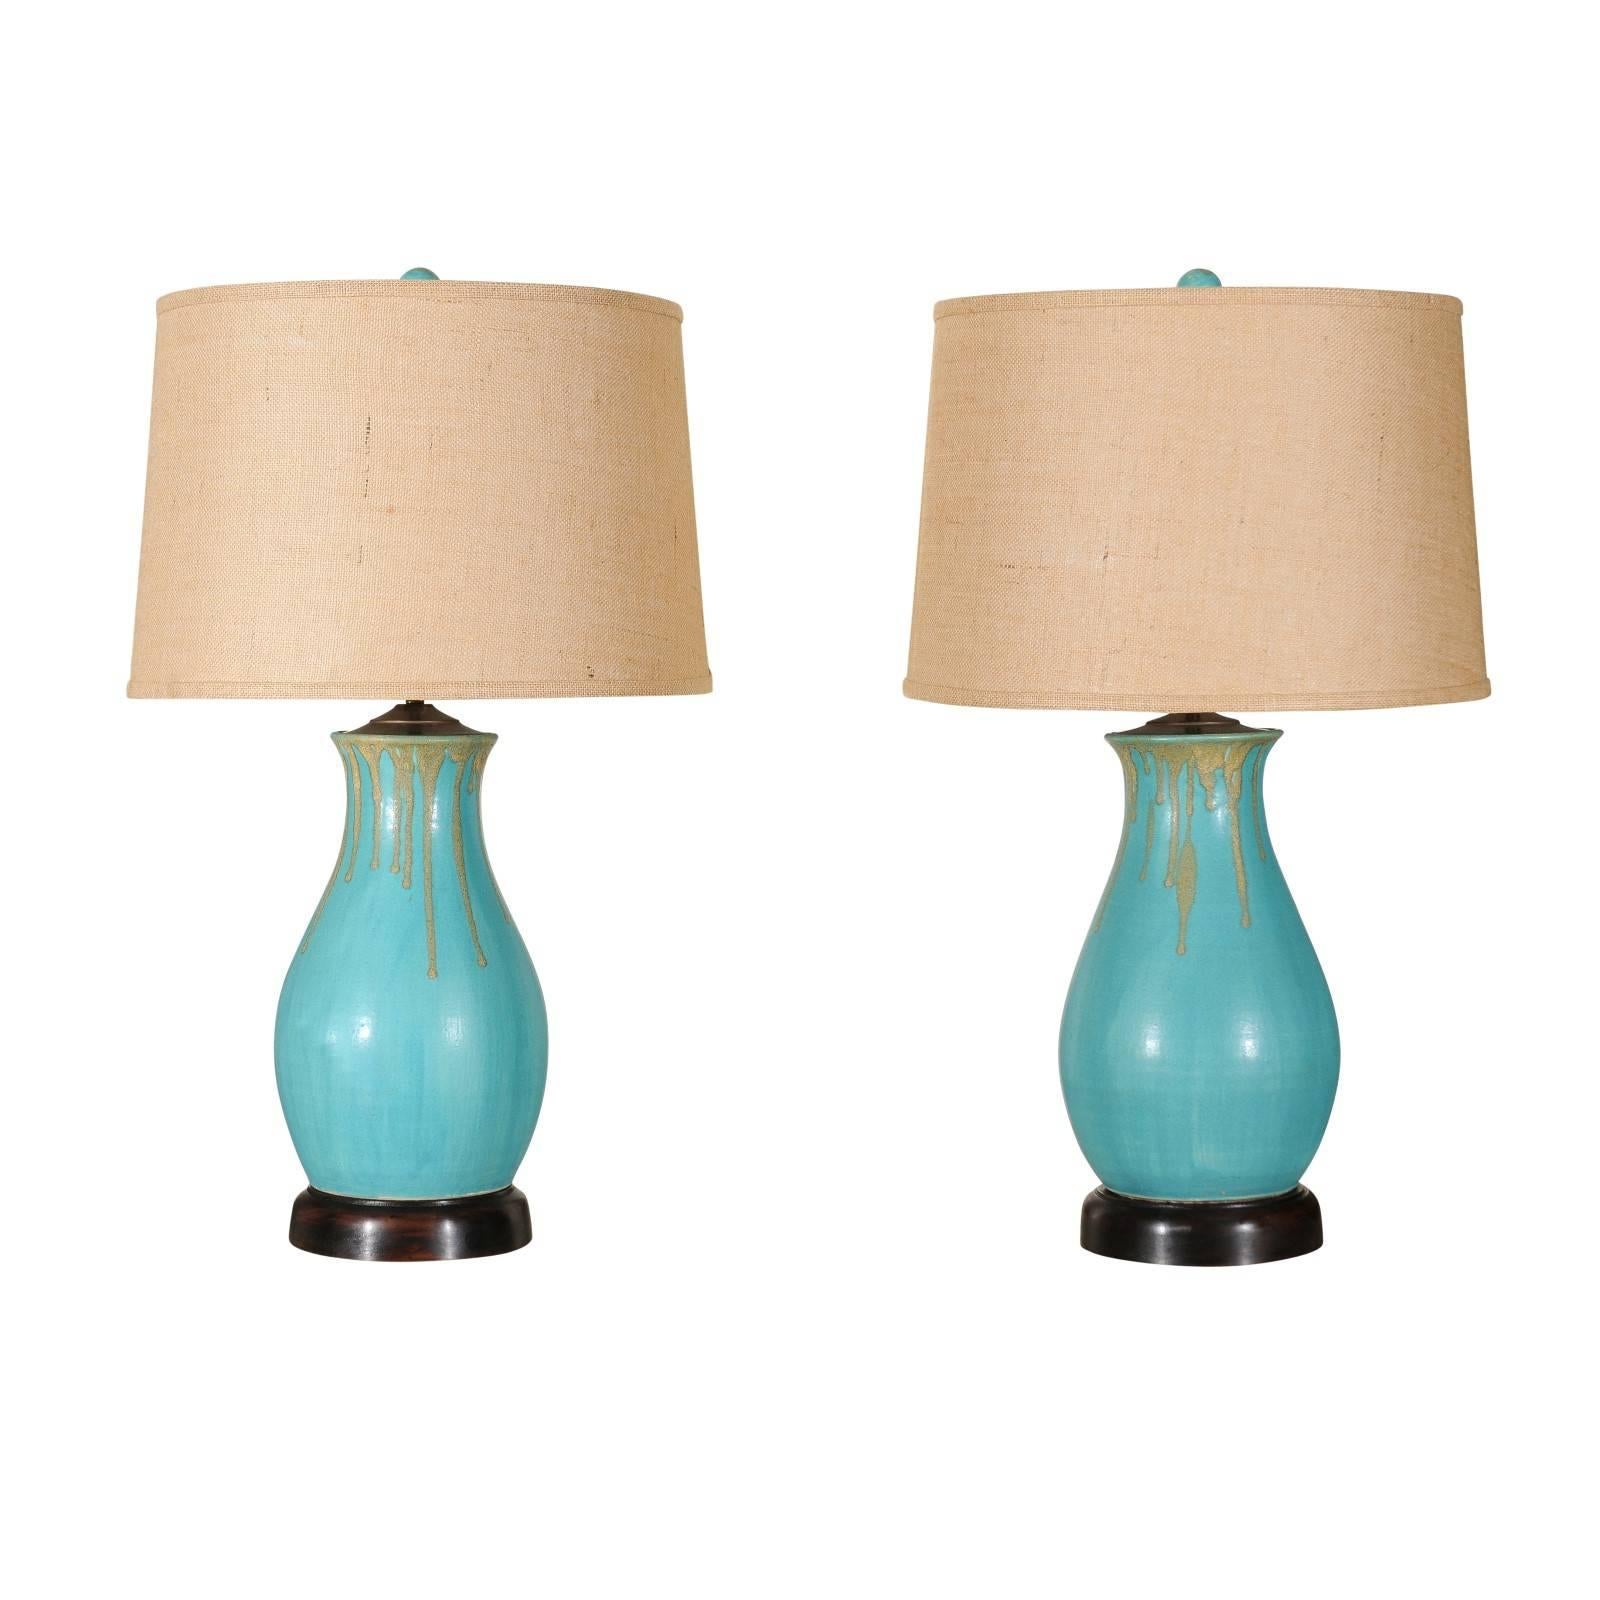 Pair of Charlie West Pottery Lamps For Sale